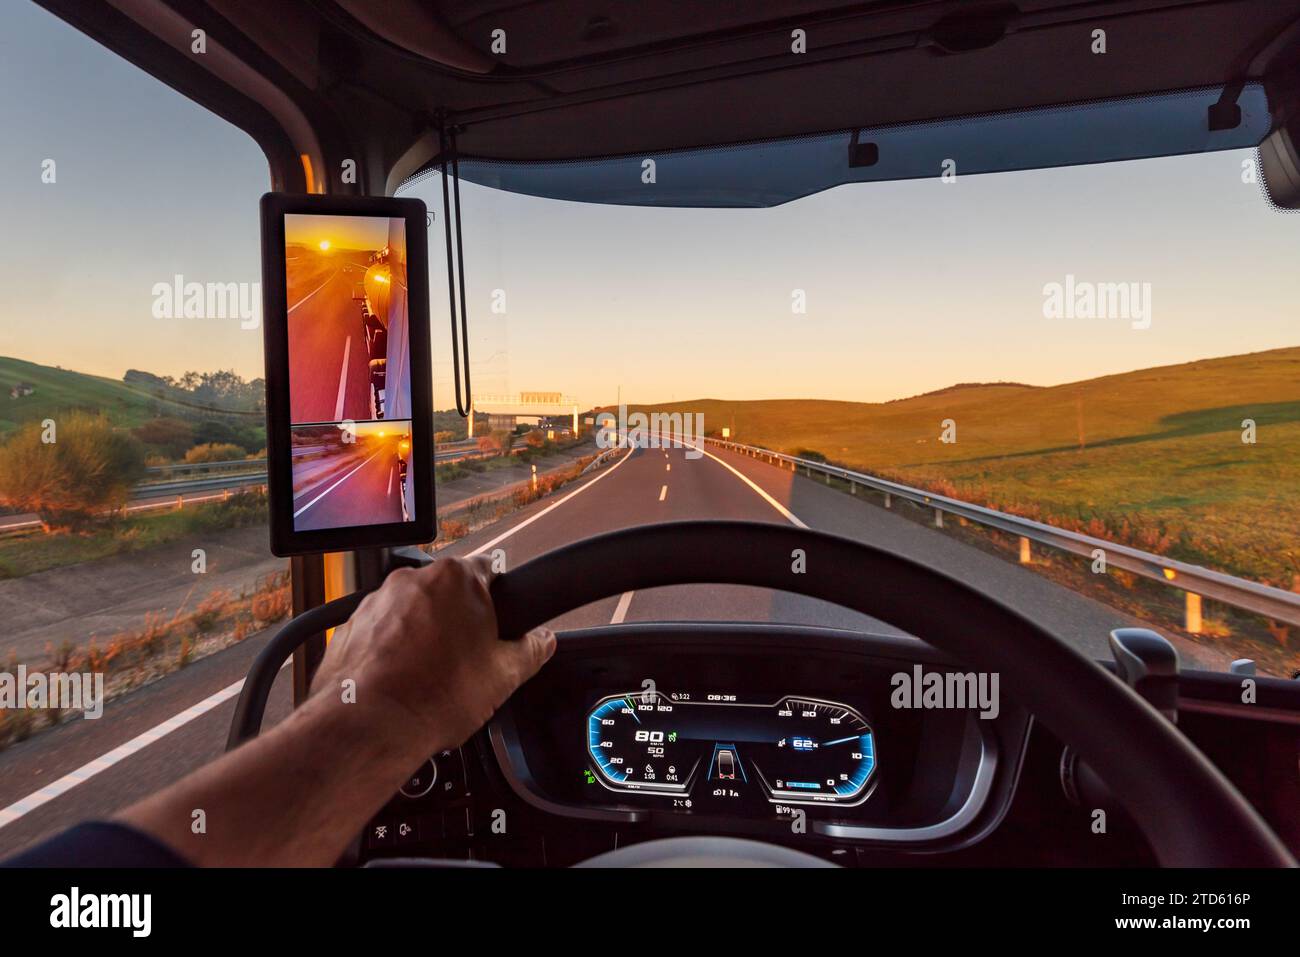 View from inside the cabin of a truck on a highway at dawn, truck with rearview camera. Stock Photo